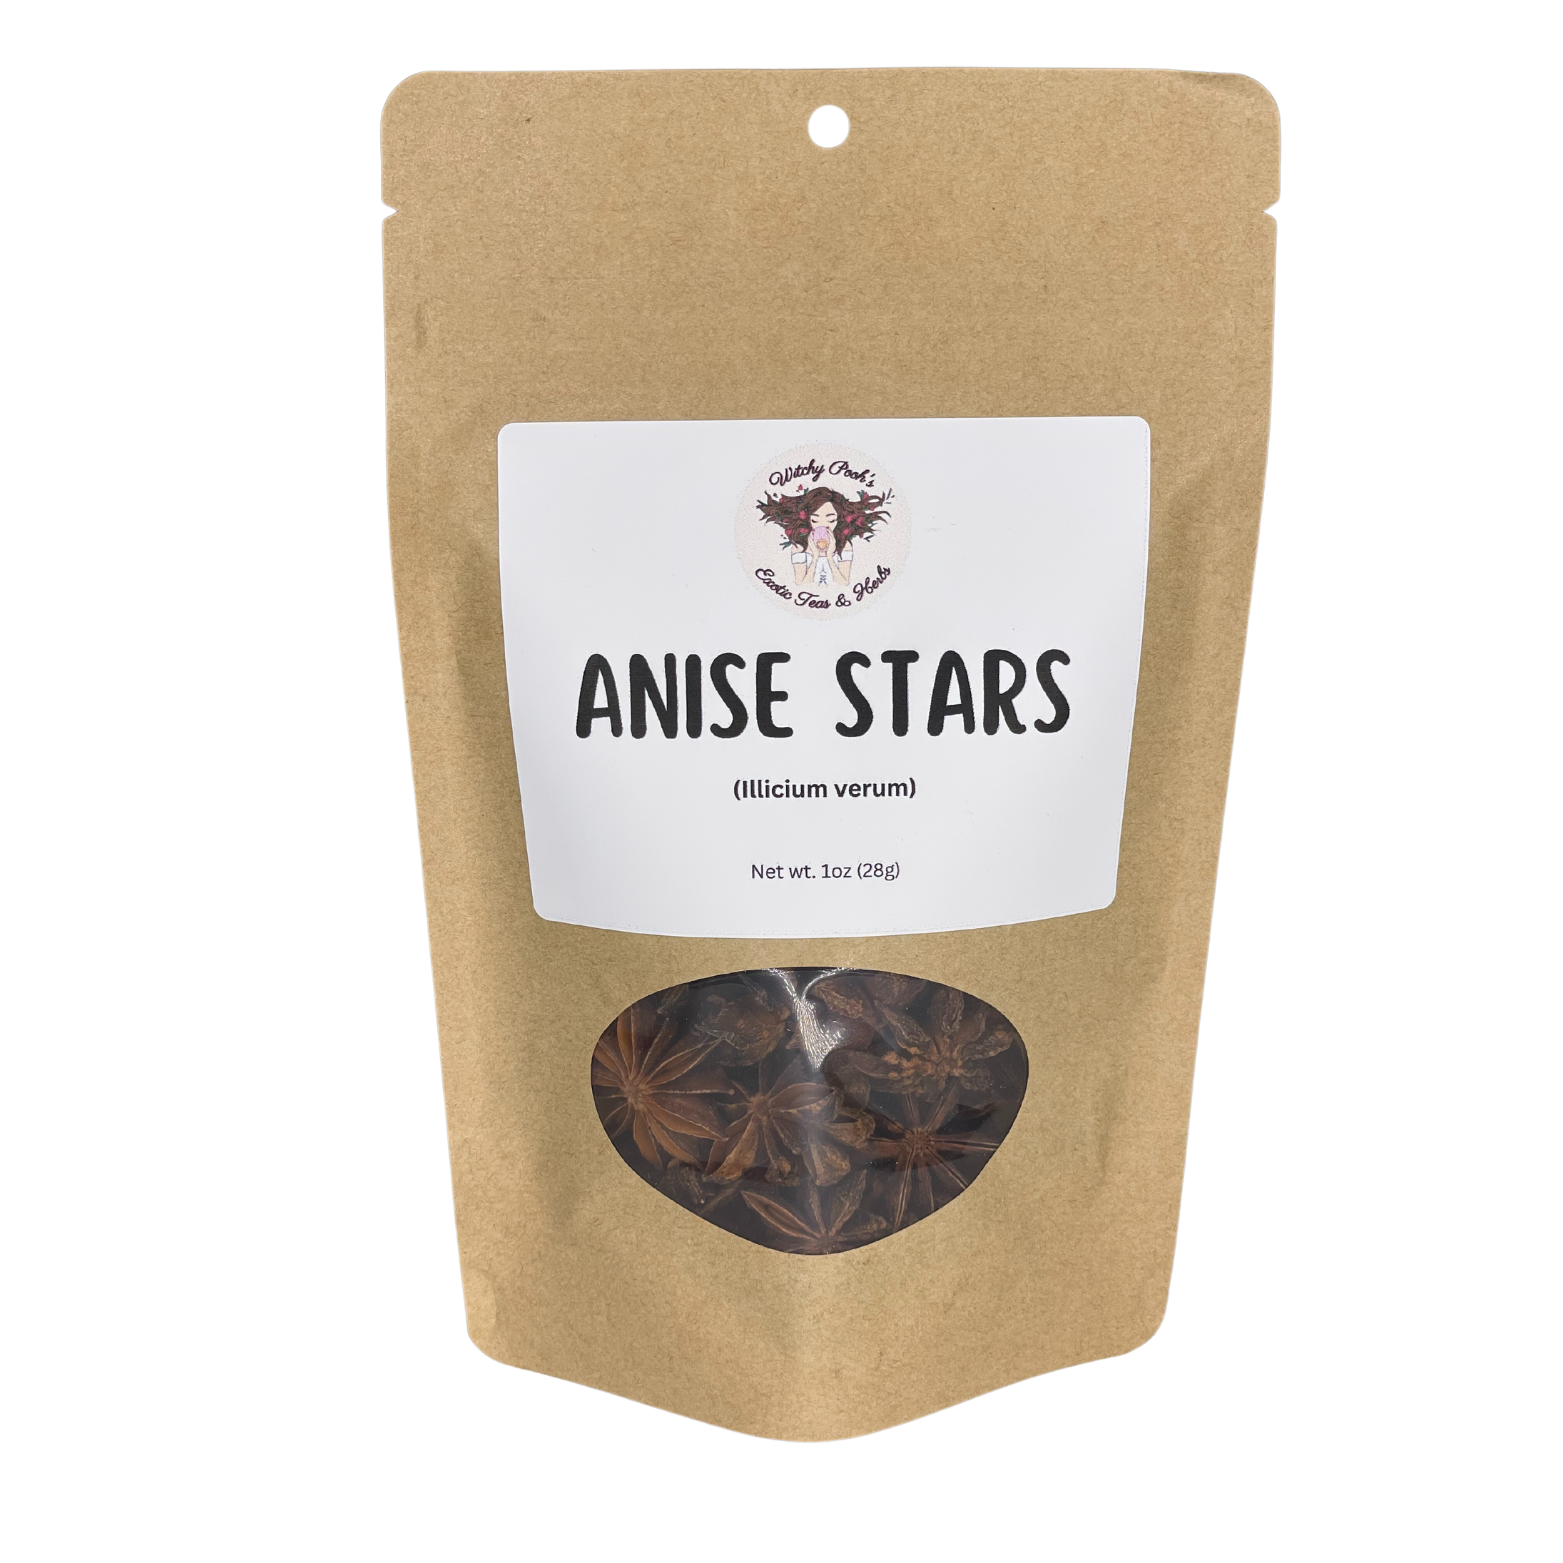 Witchy Pooh's Anise Stars Whole High Quality Strong Smell for Simmer Pots, Cooking and Ritual-4